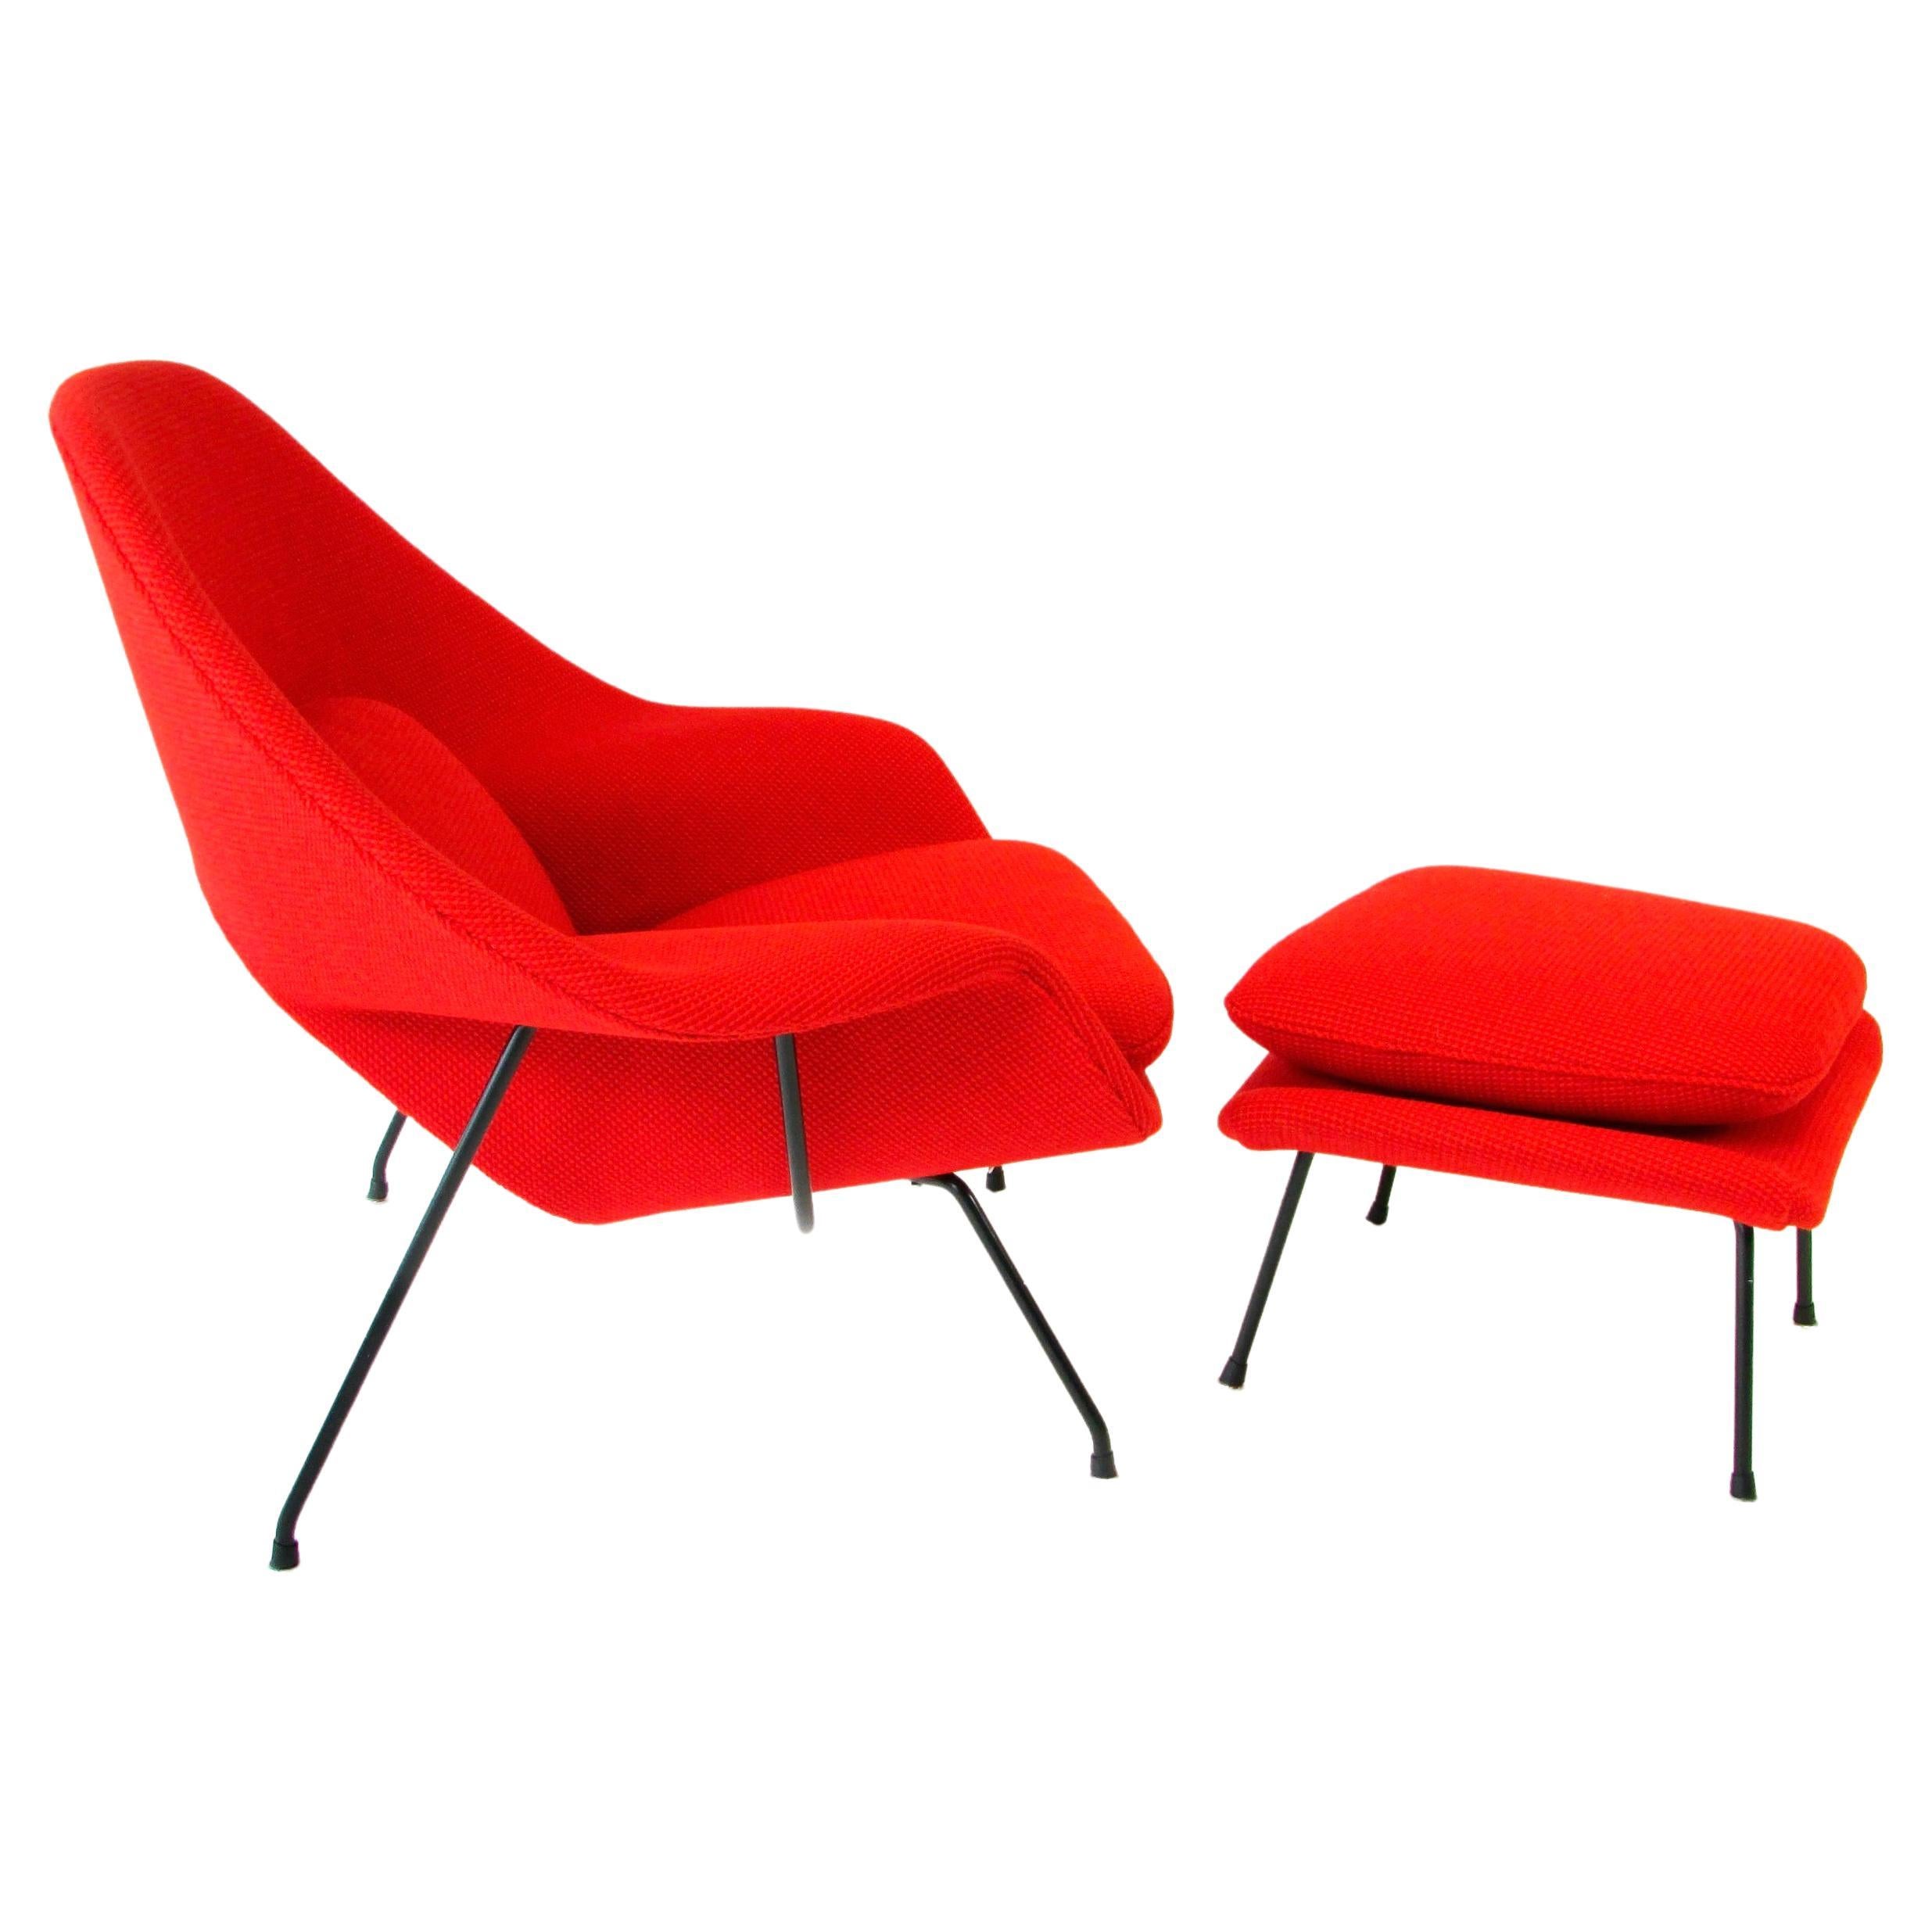 Classic Early Production Eero Saarinen for Knoll Womb Chair with Ottoman